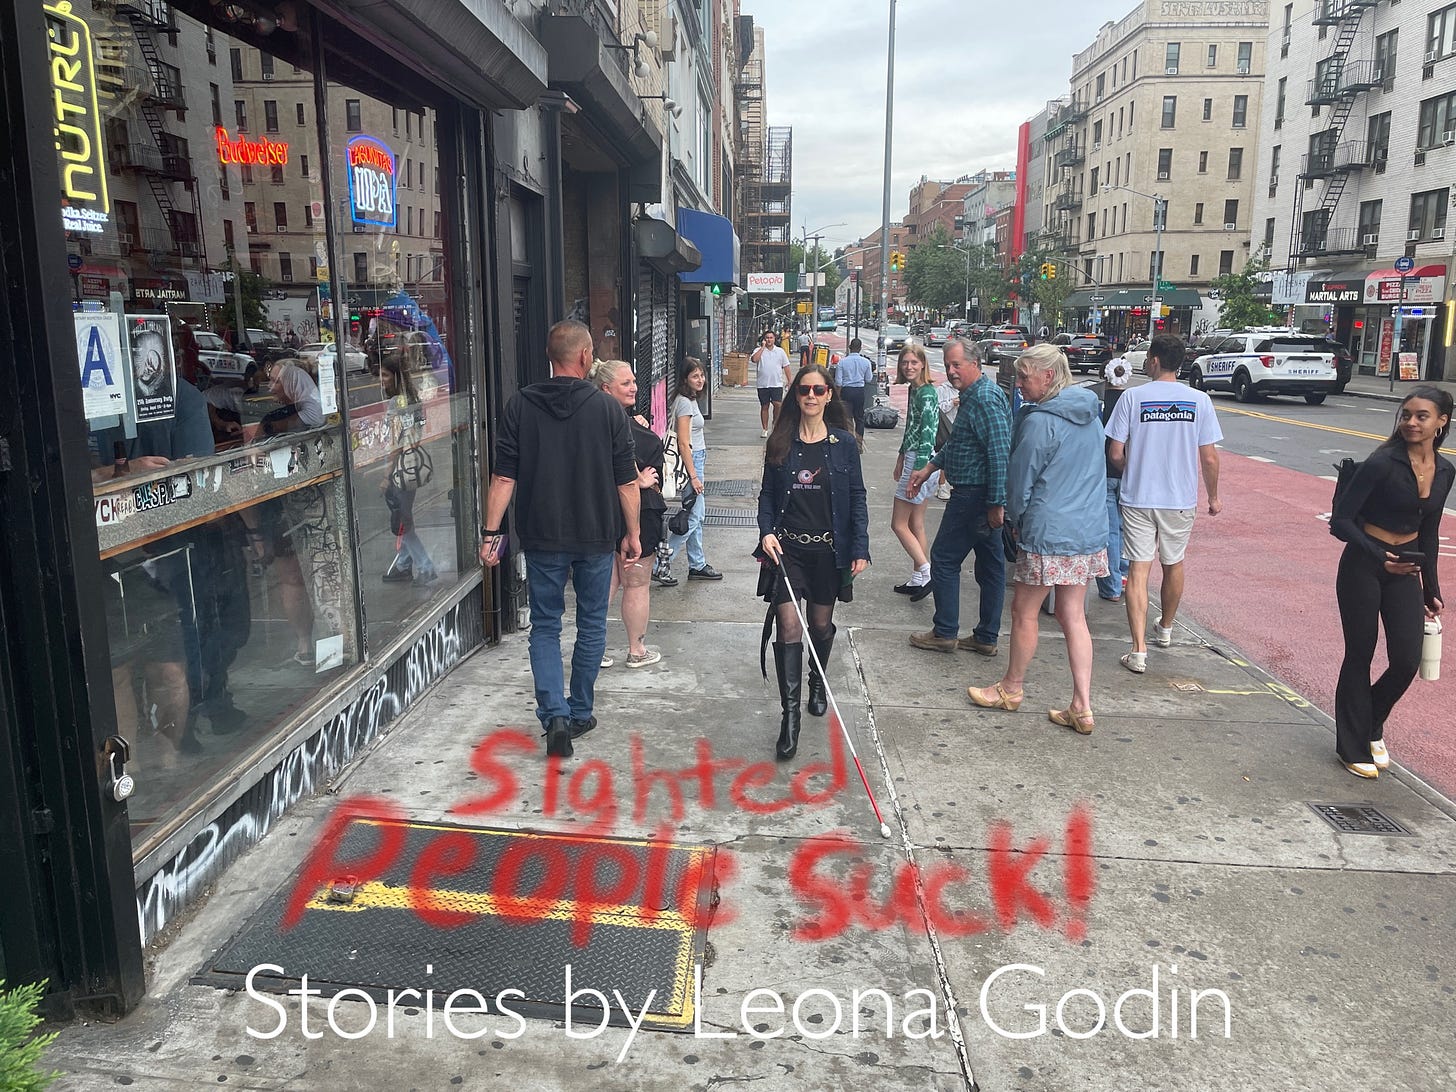 Leona Goldin, a white woman using a cane on a sidewalk in NYC, is surrounded by sighted people staring at her.